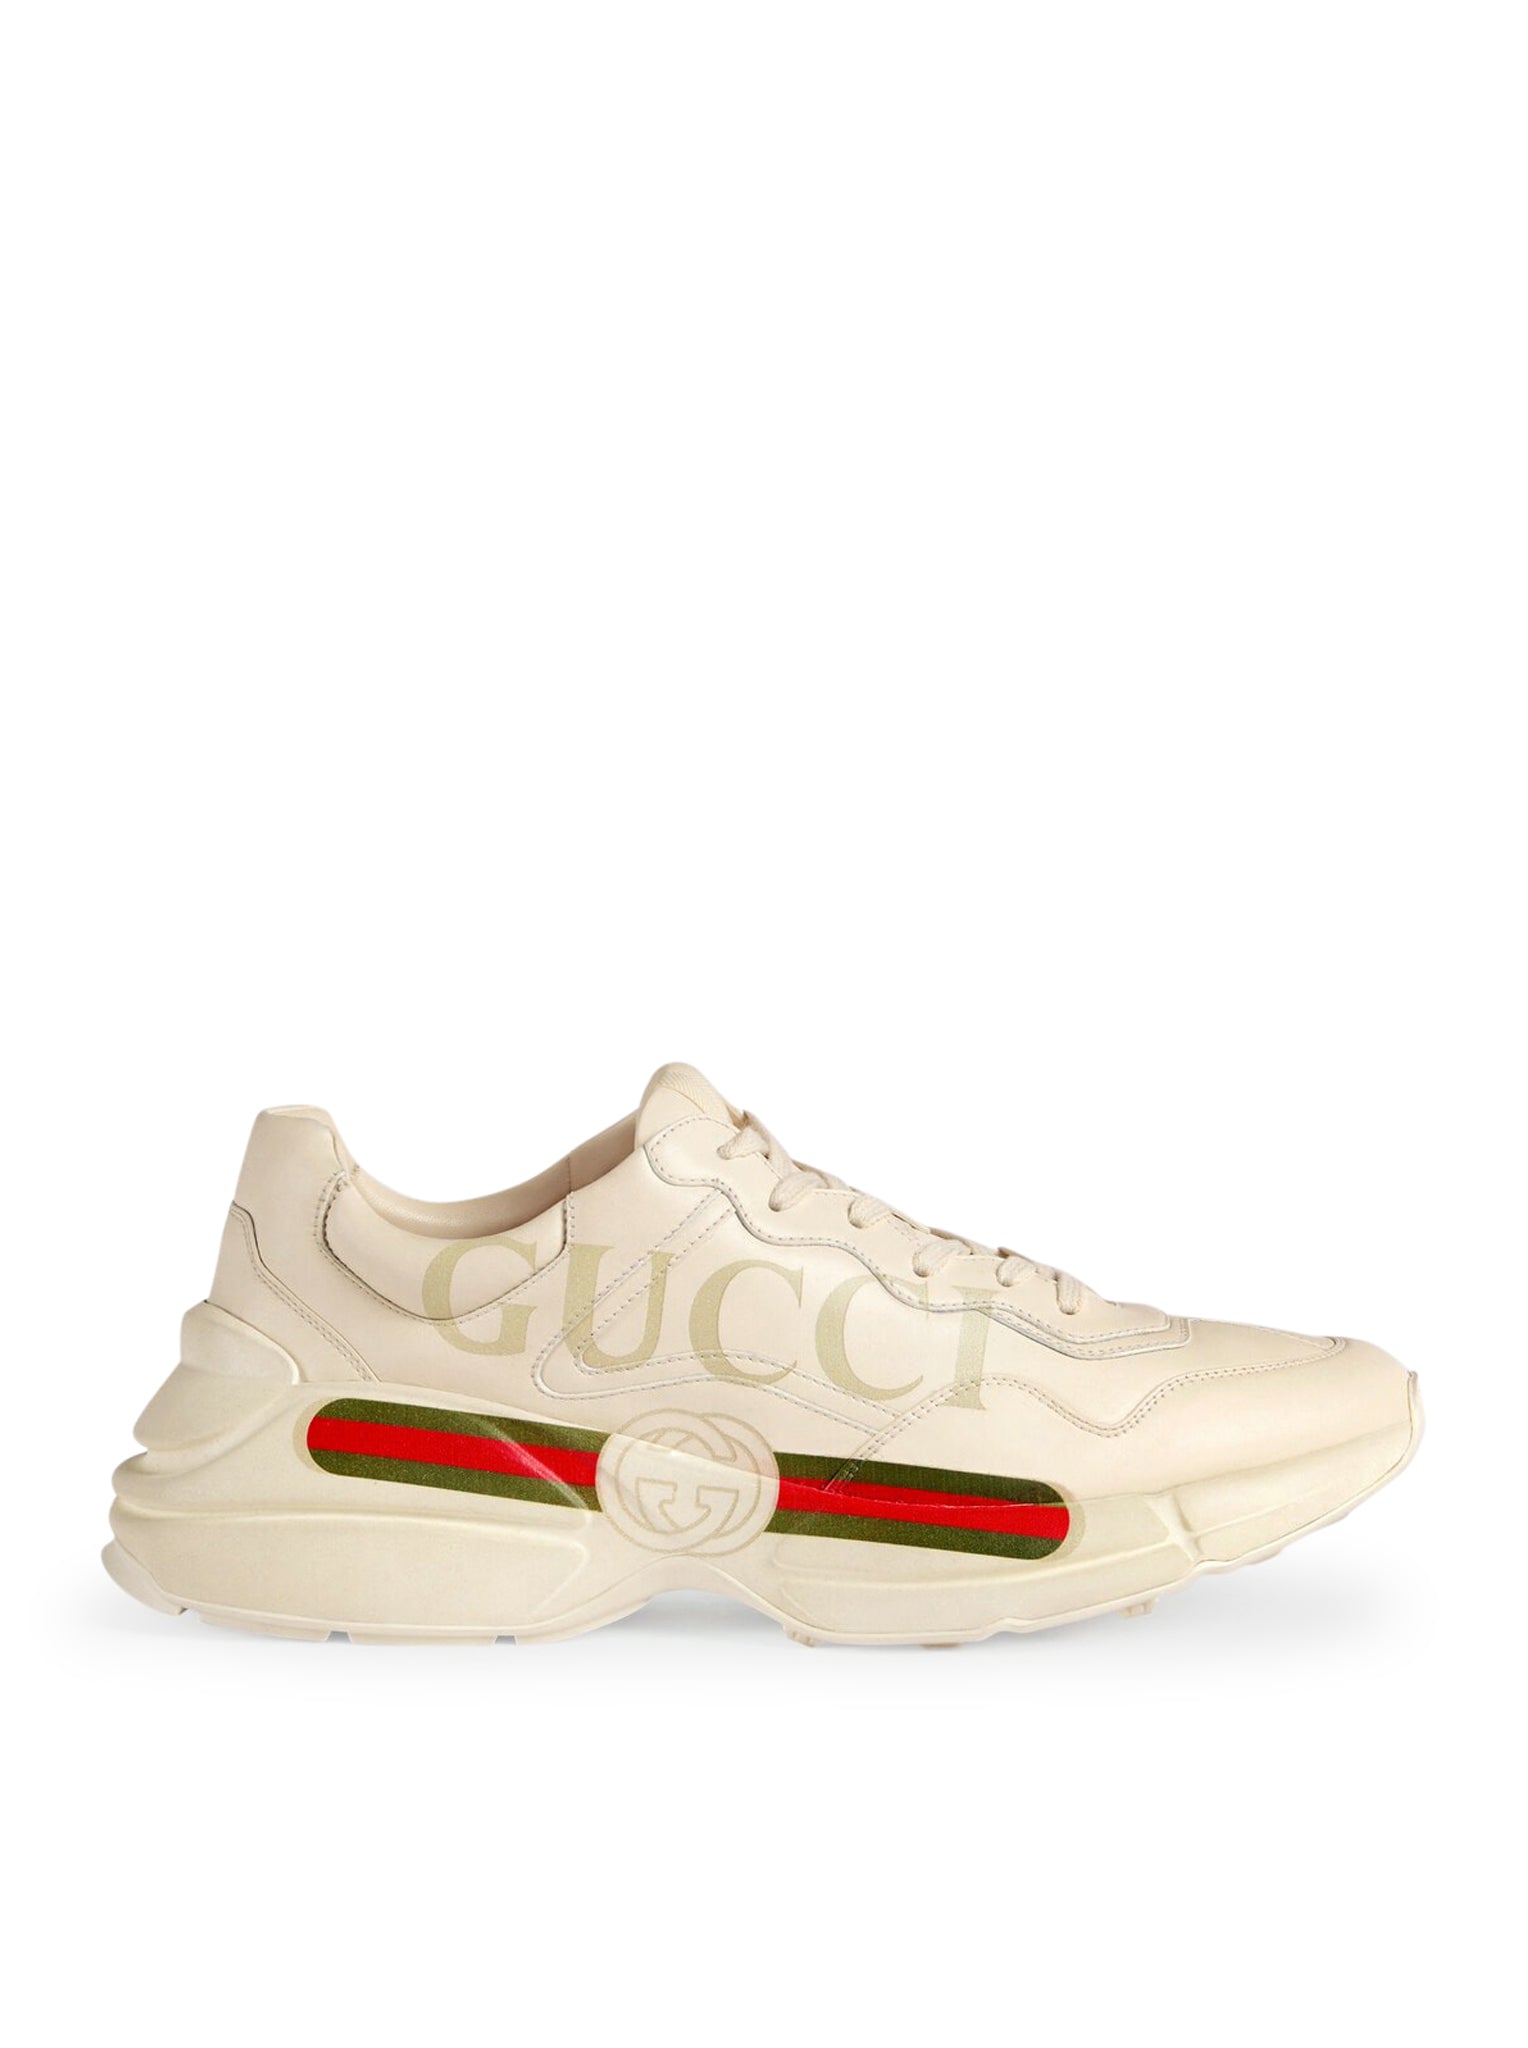 Men`s Rhyton sneaker in leather with Gucci logo